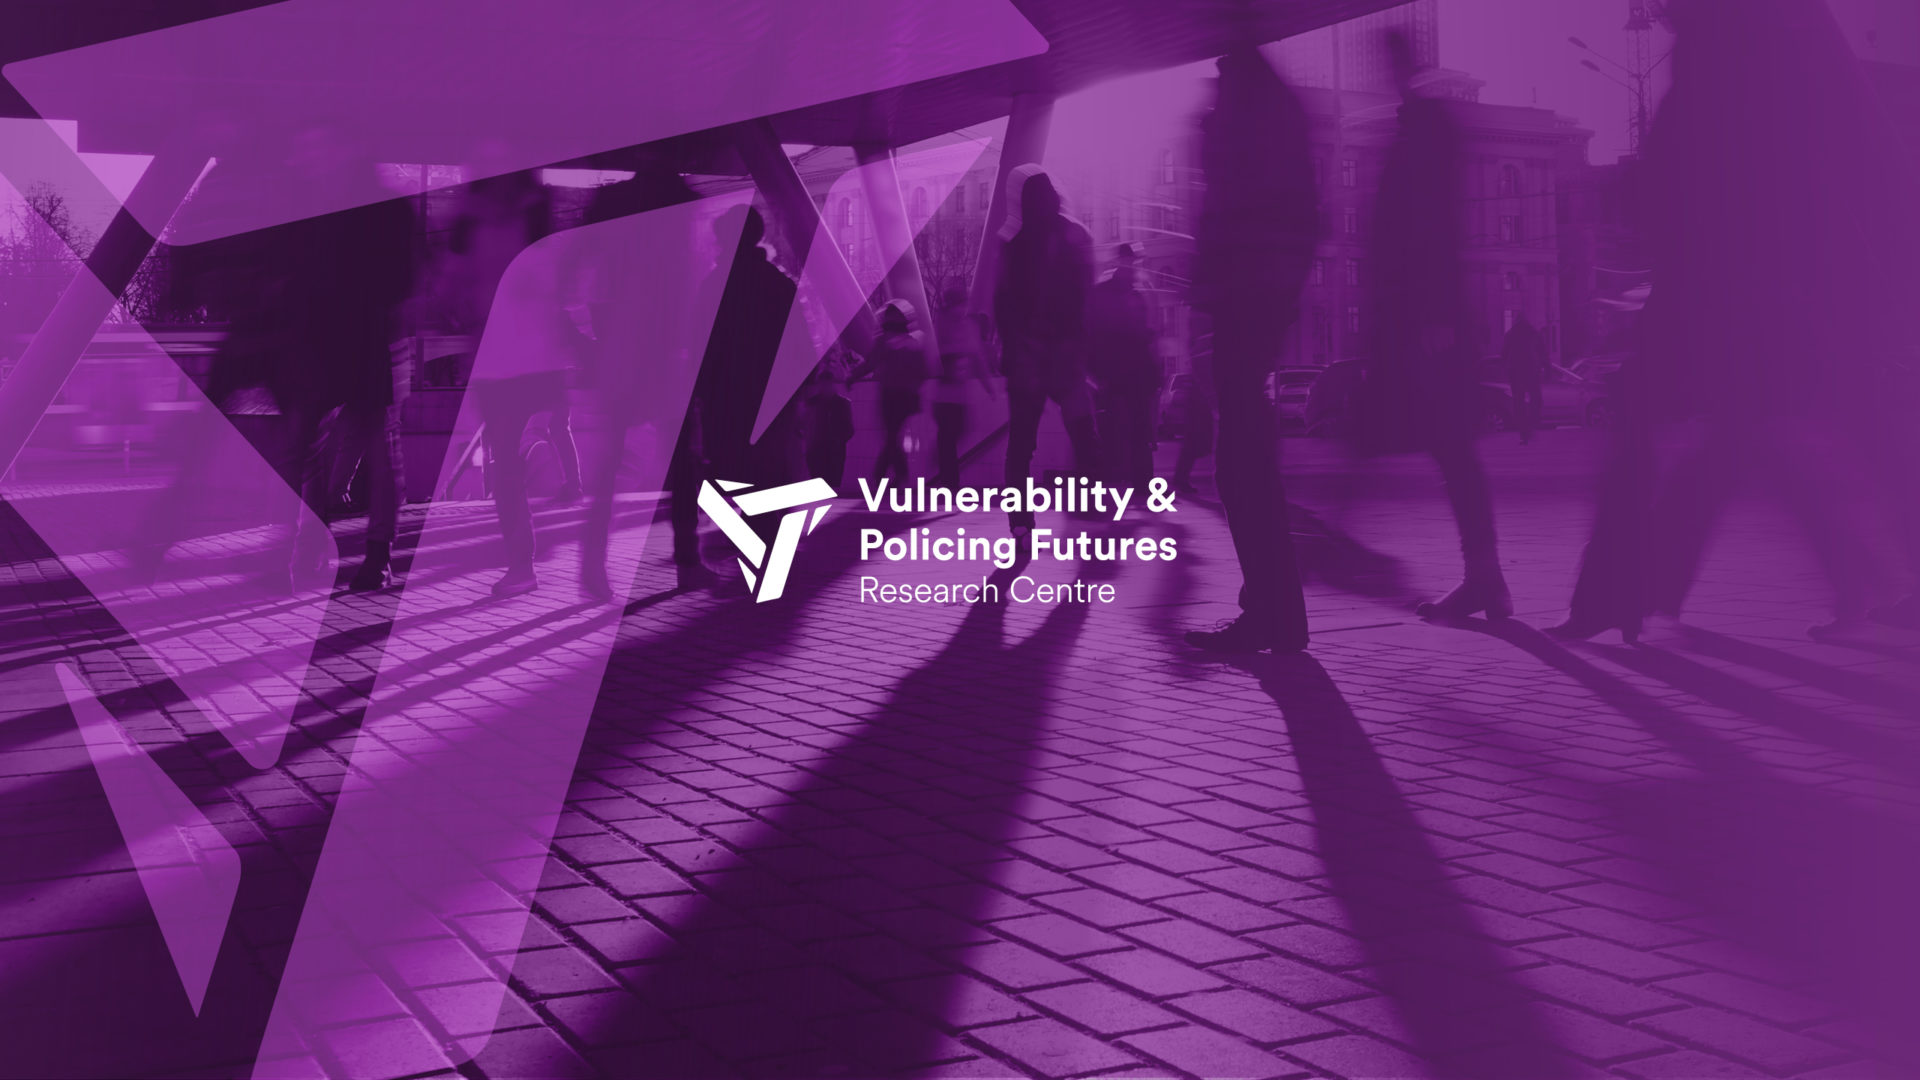 White Vulnerability & Policing Futures logo on purple background